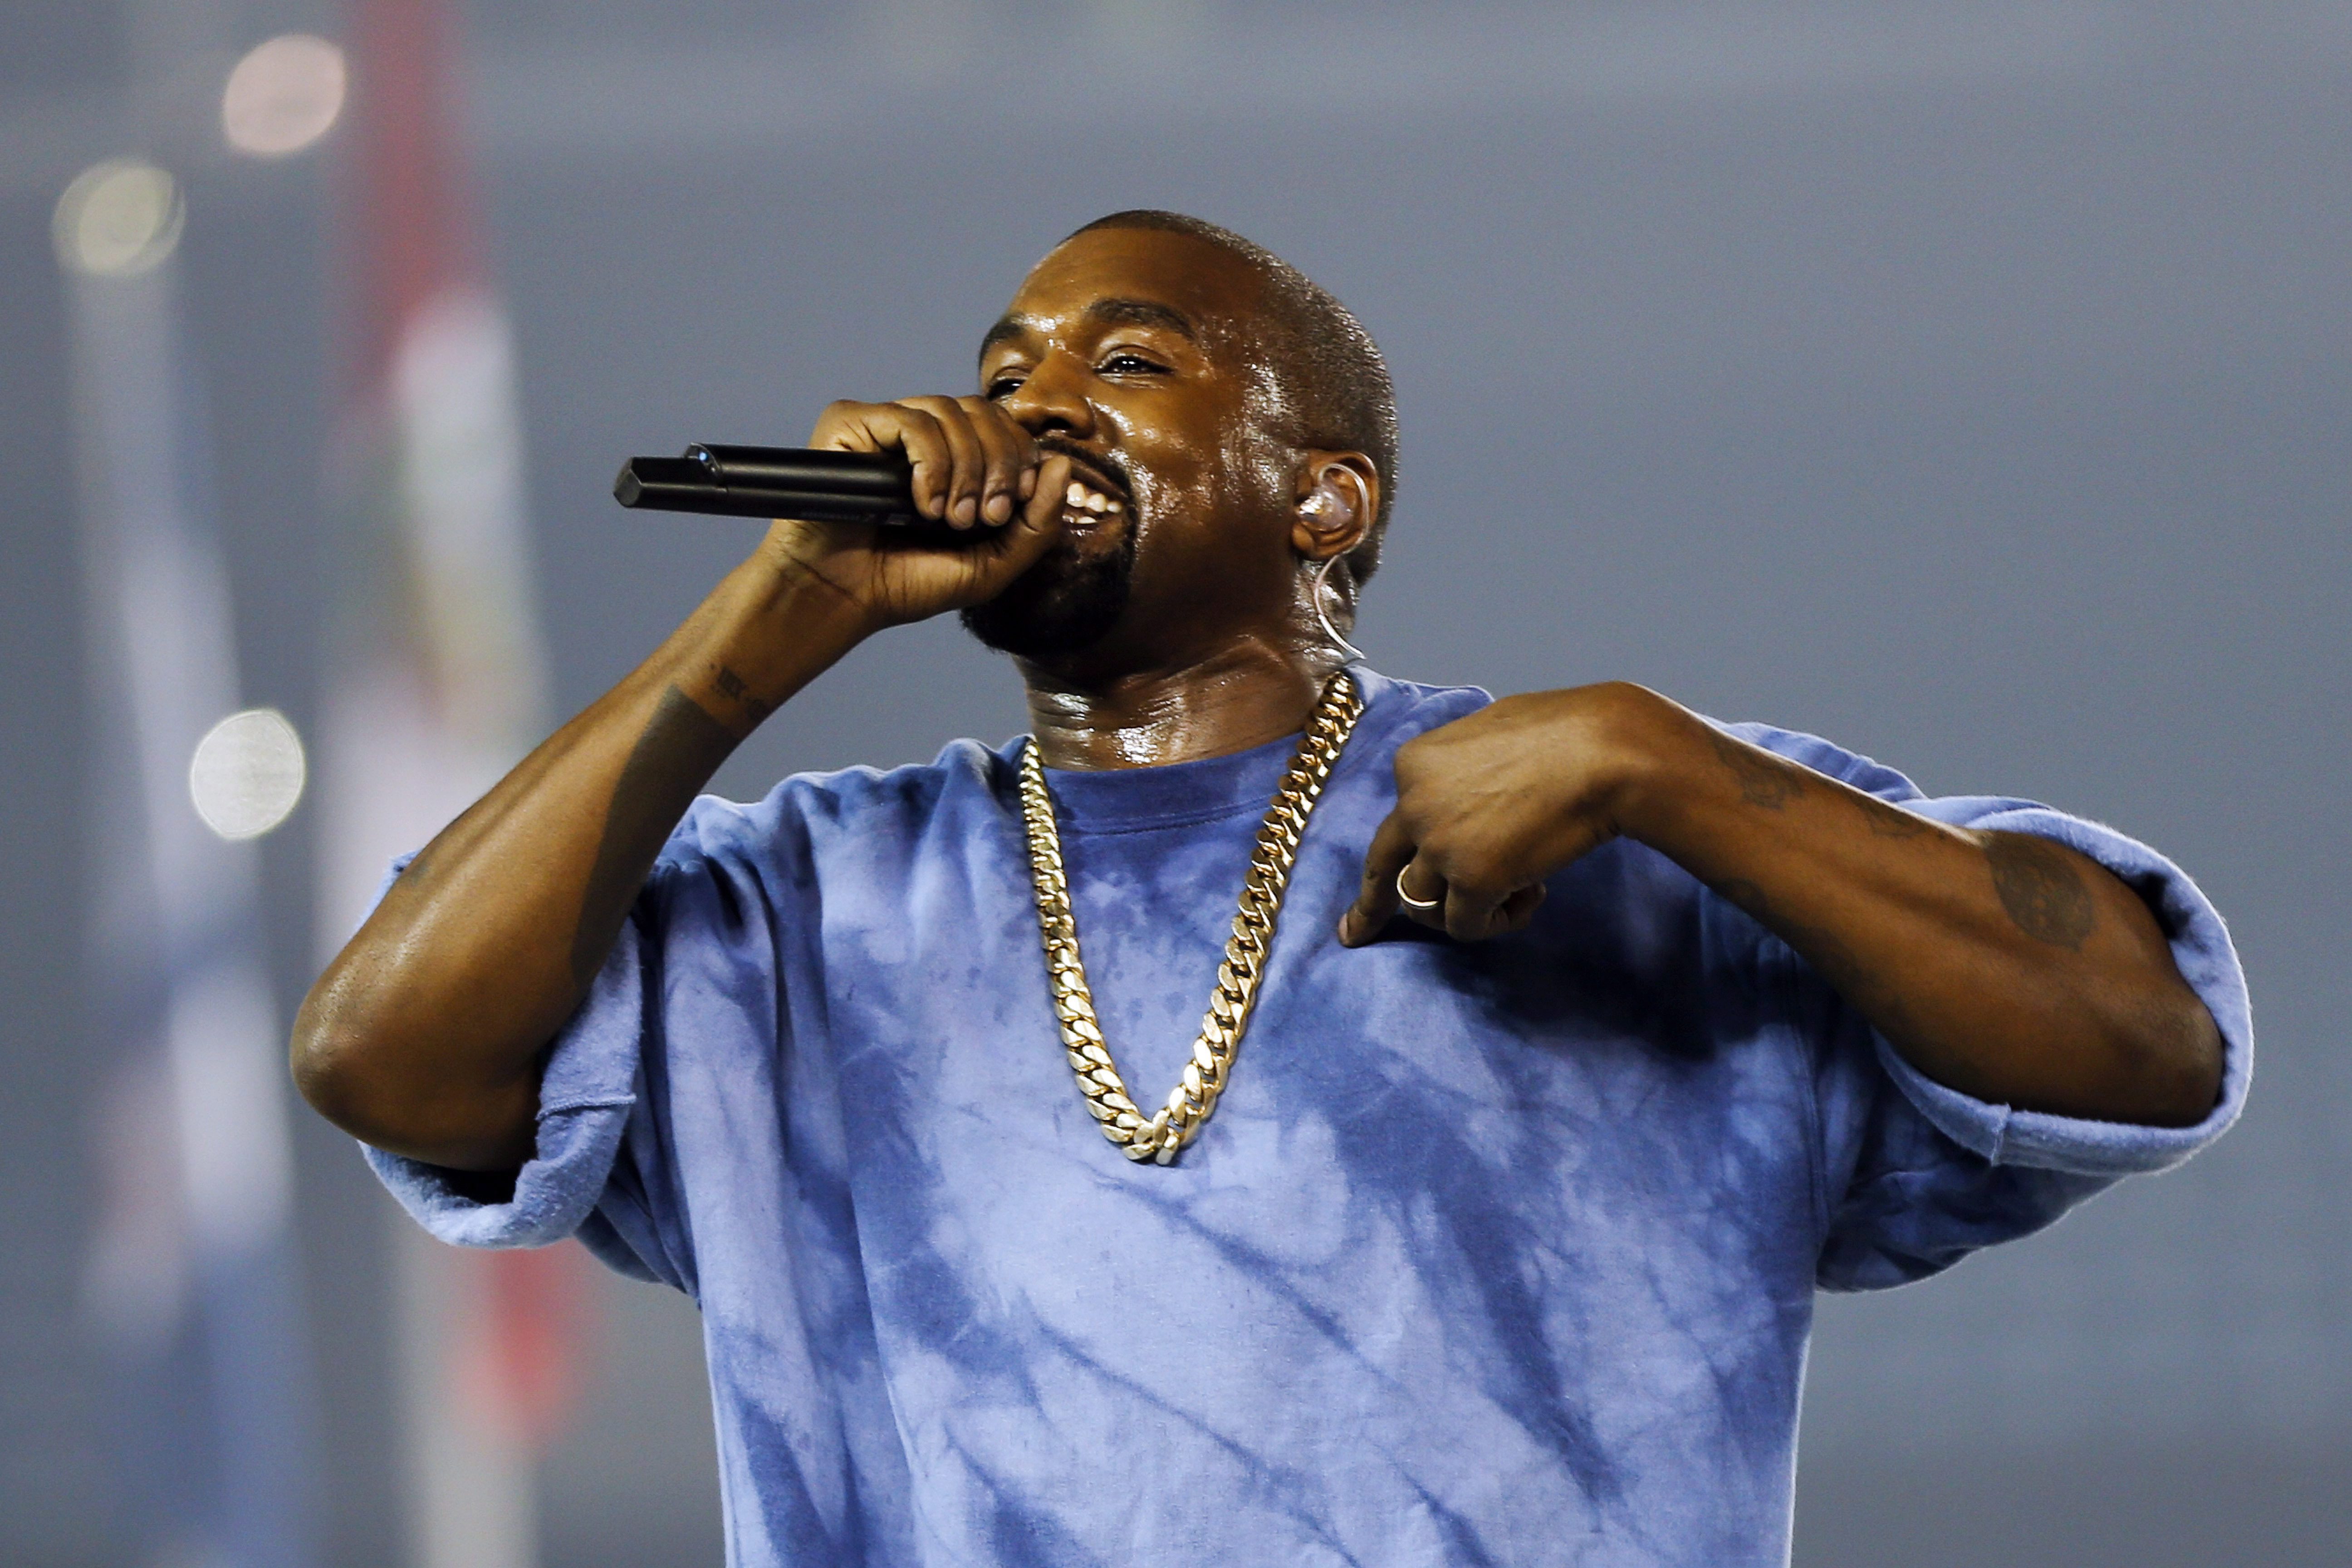 FILE - In this July 26, 2015, file photo, Kanye West performs during the closing ceremony of the Pan Am Games in Toronto. Kanye West, Beck, the Strokes and the Killers are set to perform at the three-day 2016 Governors Ball Music Festival in June.  (AP Photo/Julio Cortez, File)